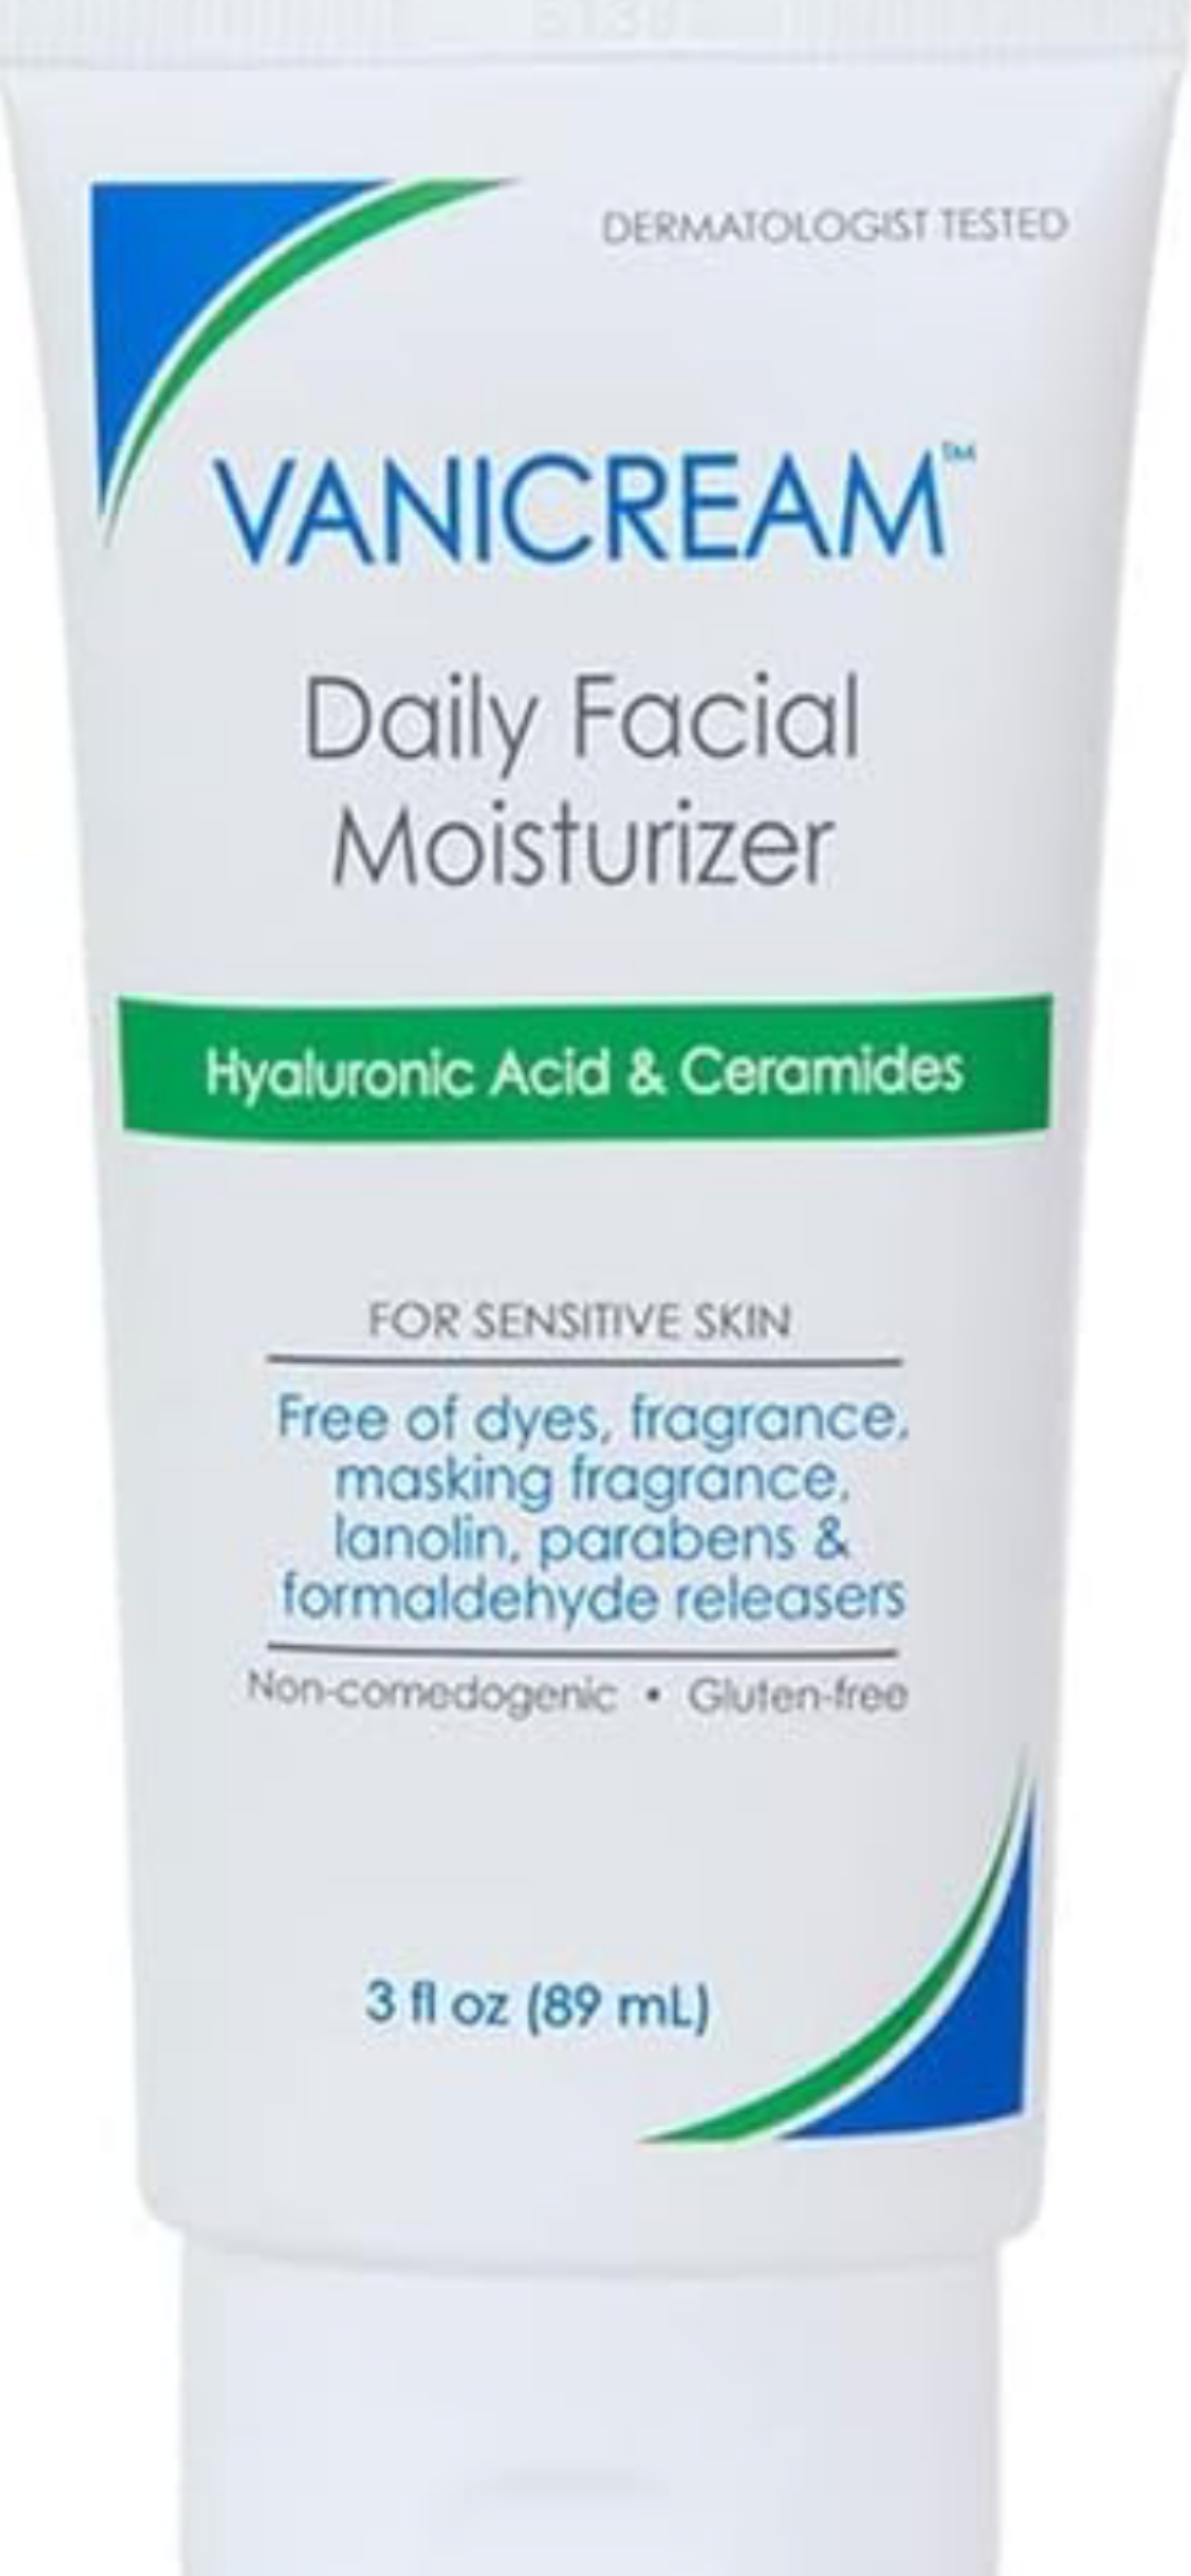 Vanicream DAILY FACIAL MOISTURIZER Unscented for SENSITIVE SKIN 23oz 89g - Supporting ORCRF.org